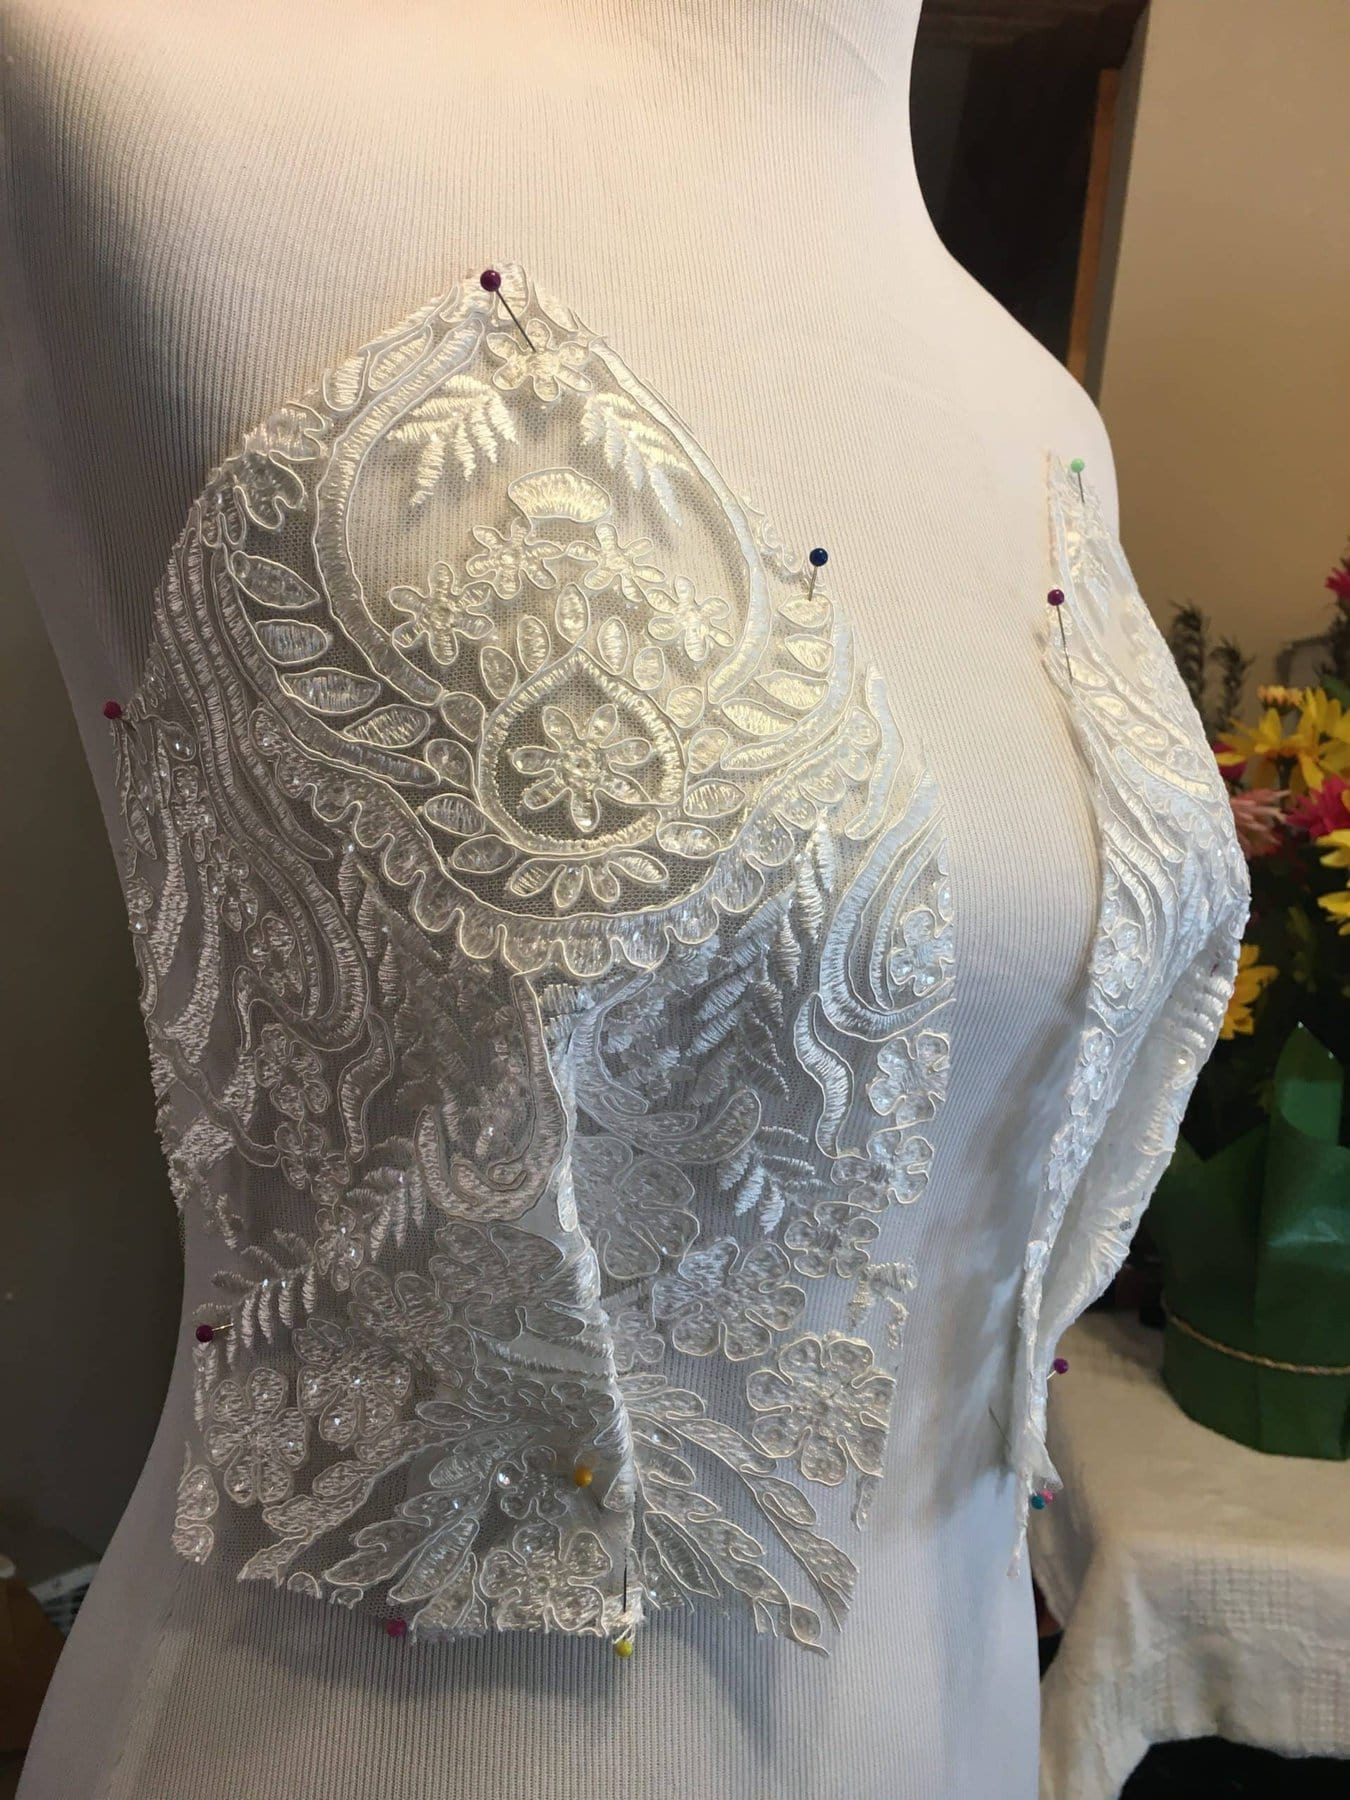 Detail of wedding gown from Kendy Manzano's final collection during construction